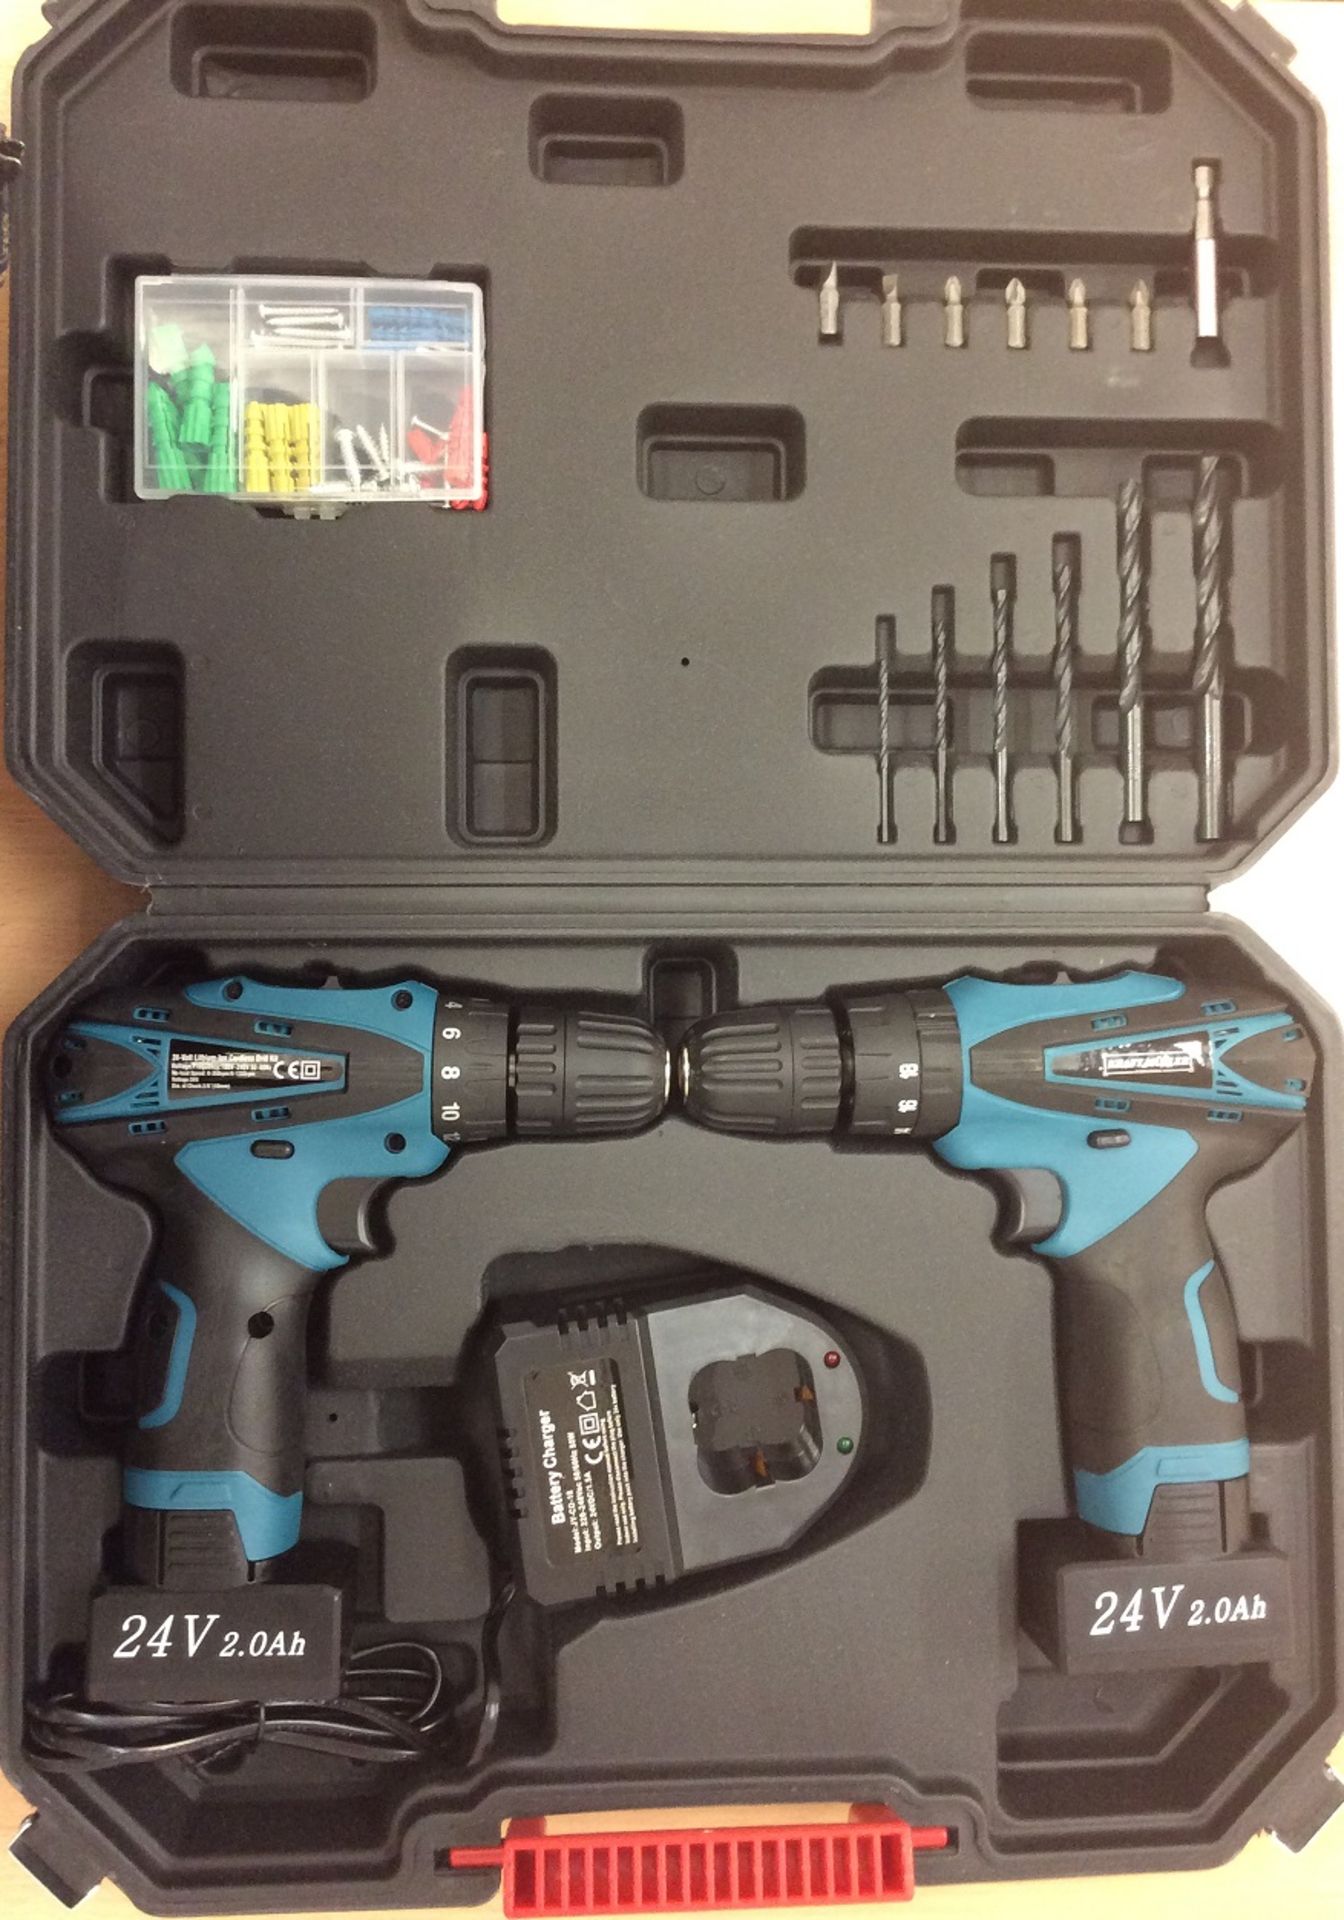 V Brand New Lithium-ion Cordless 24 volt Drill Set In Carry Case With Keyless Chuck - Impact Setting